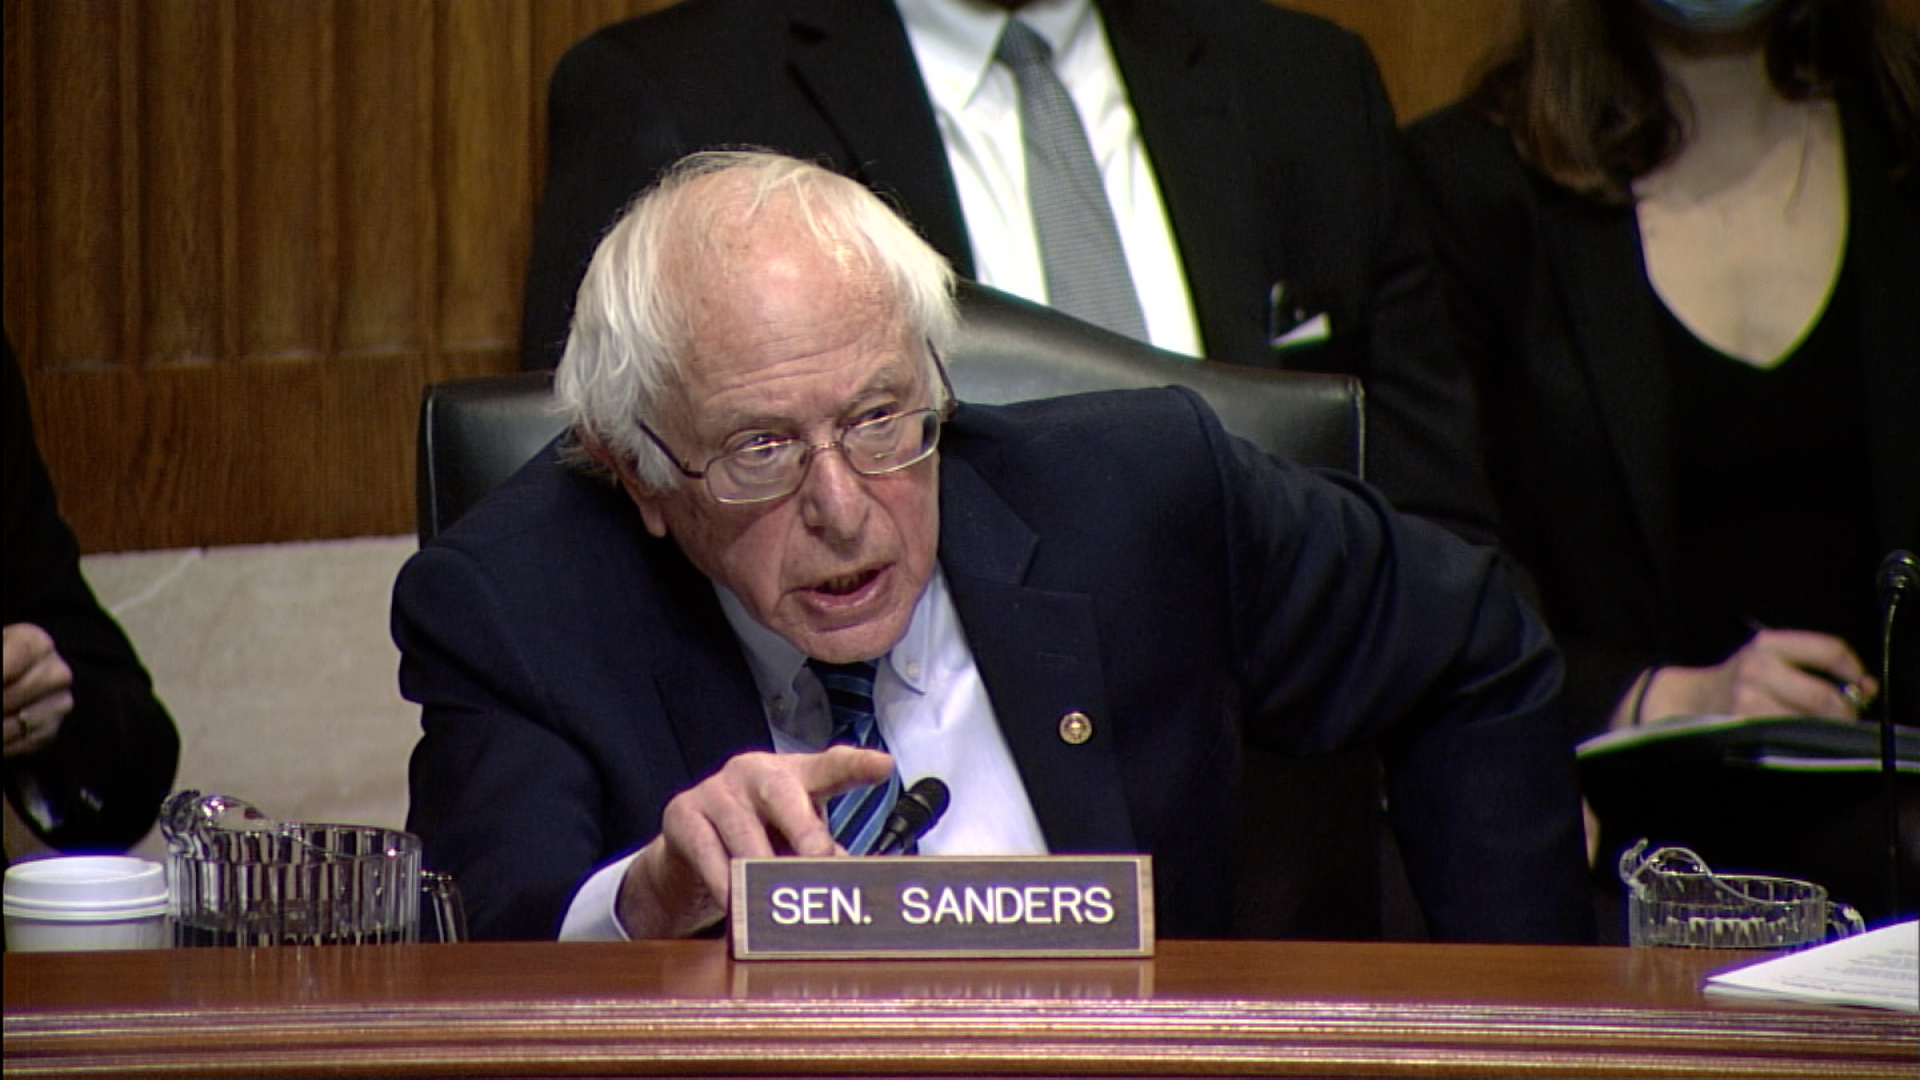 Senator from Vermont Bernie Sanders addressing Norfolk Southern CEO Alan Shaw during today's hearing on Capitol Hill.